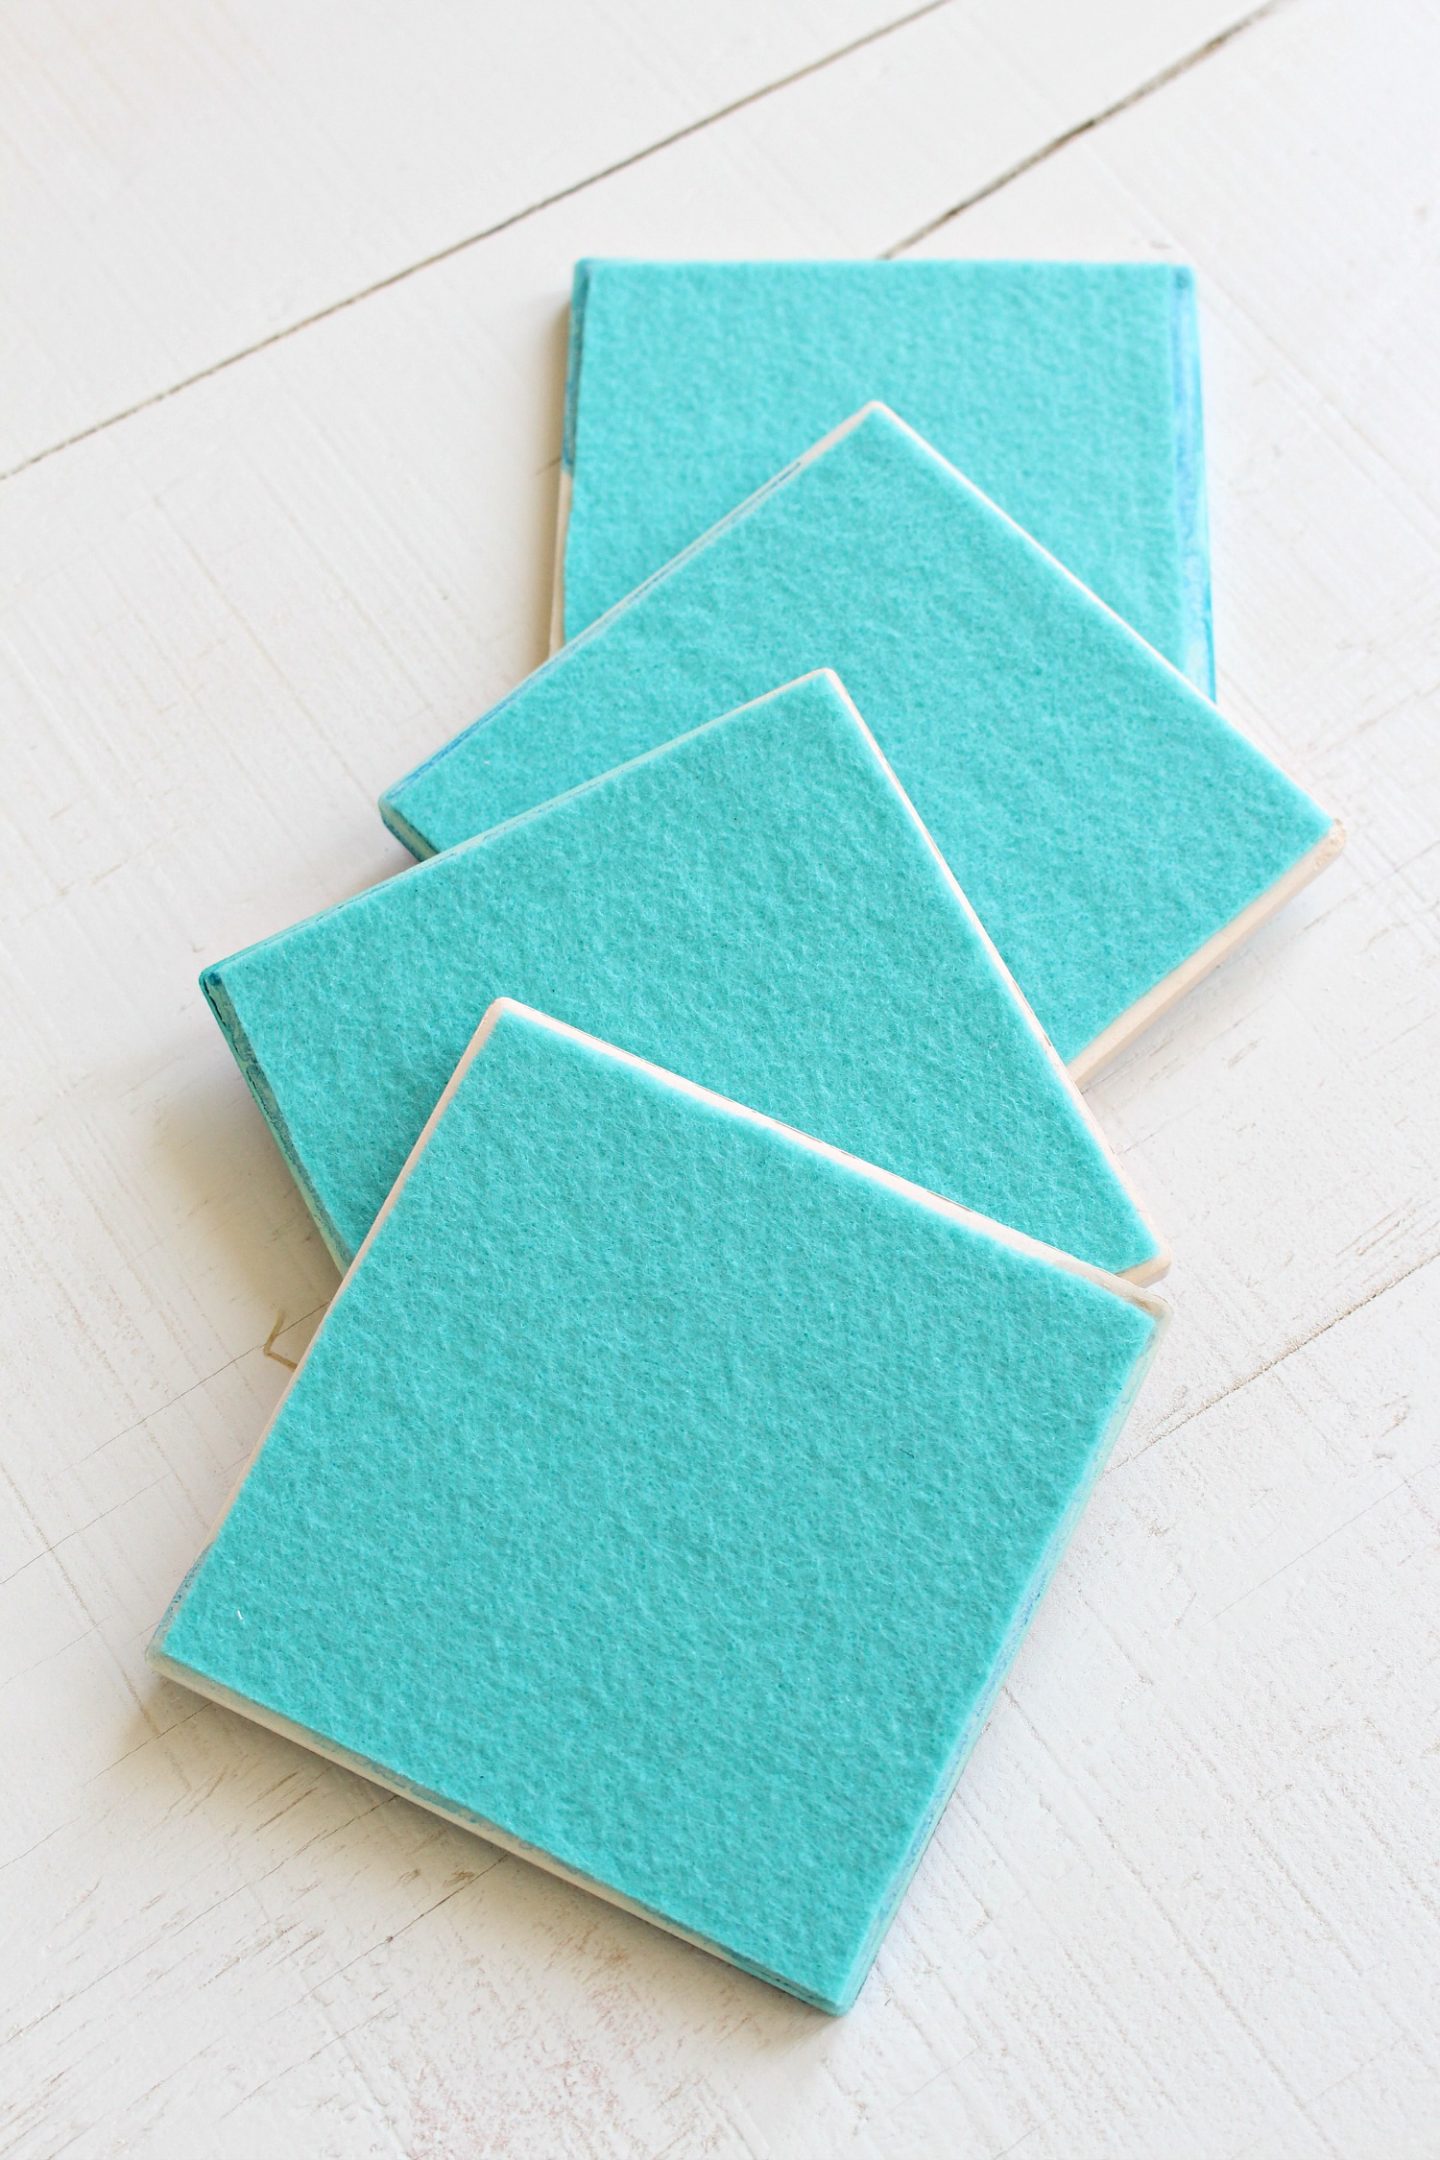 Turn Tiles into Coaster by Adding Felt on the Back